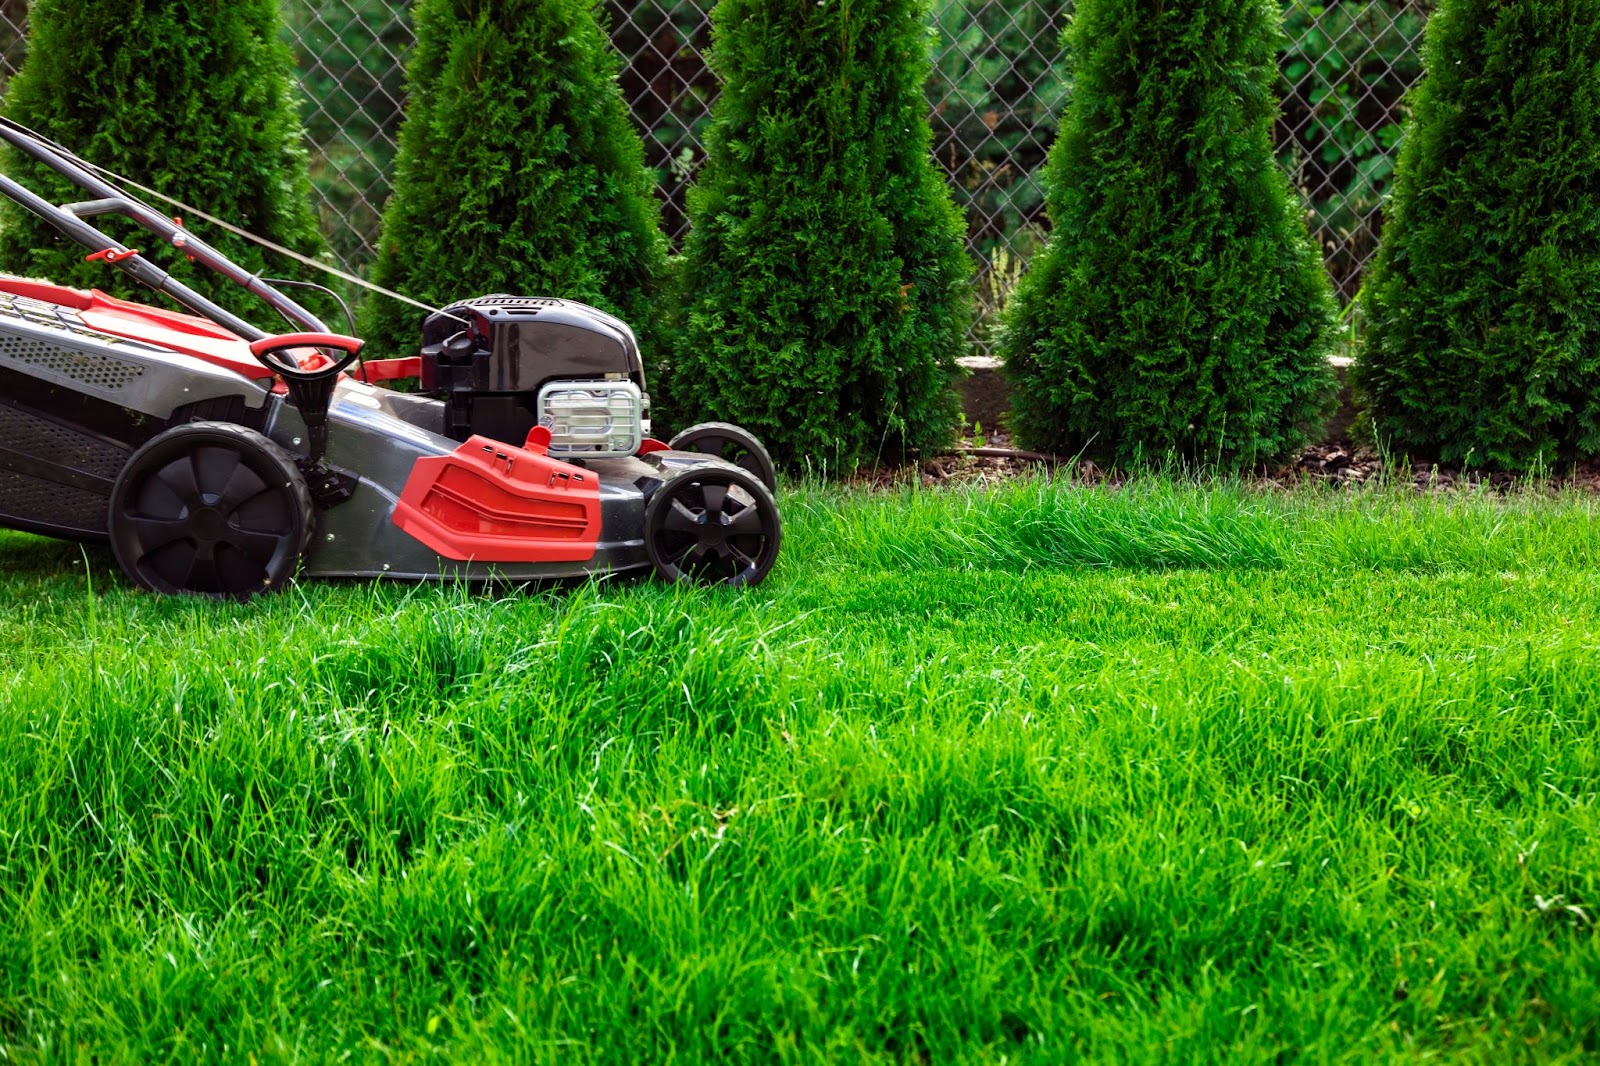 How Often Should I Mow My Lawn?